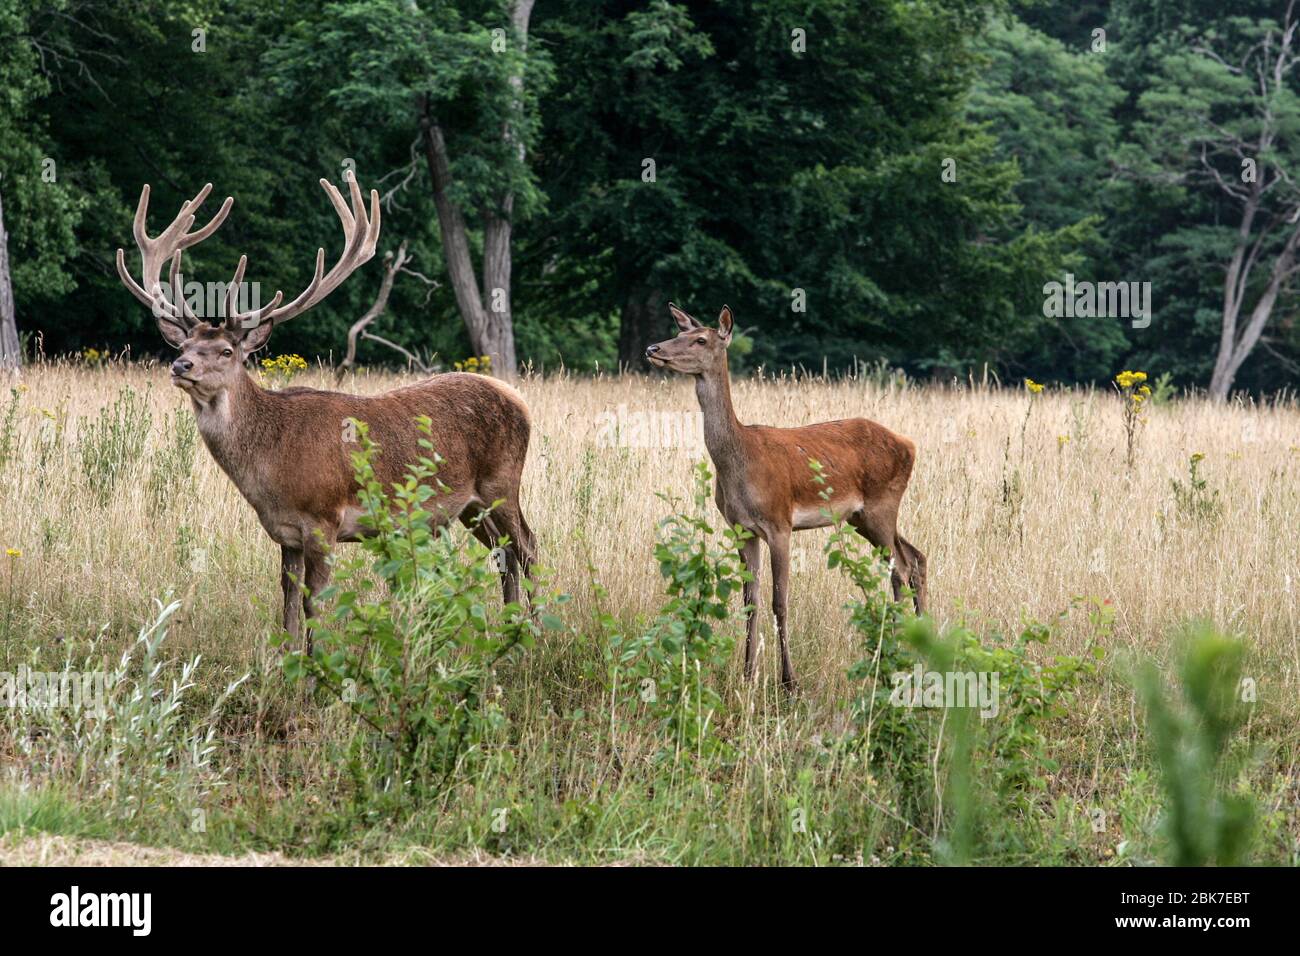 DEER FAMILY IN ARDENAY FOREST Stock Photo